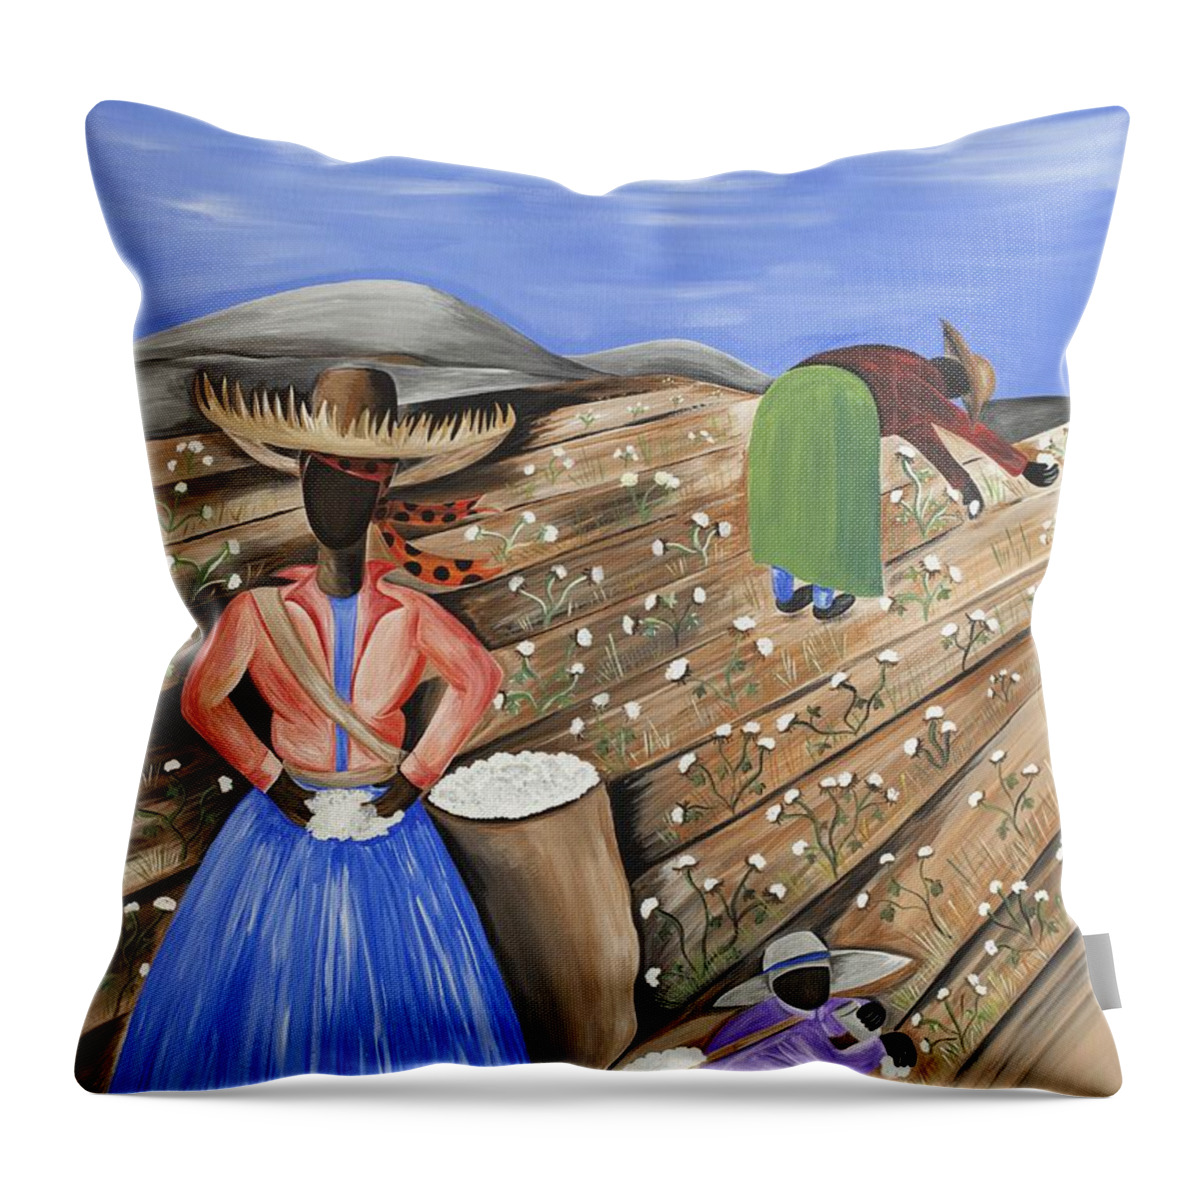 Gullah Art Throw Pillow featuring the painting Cotton Pickin' Cotton by Patricia Sabreee